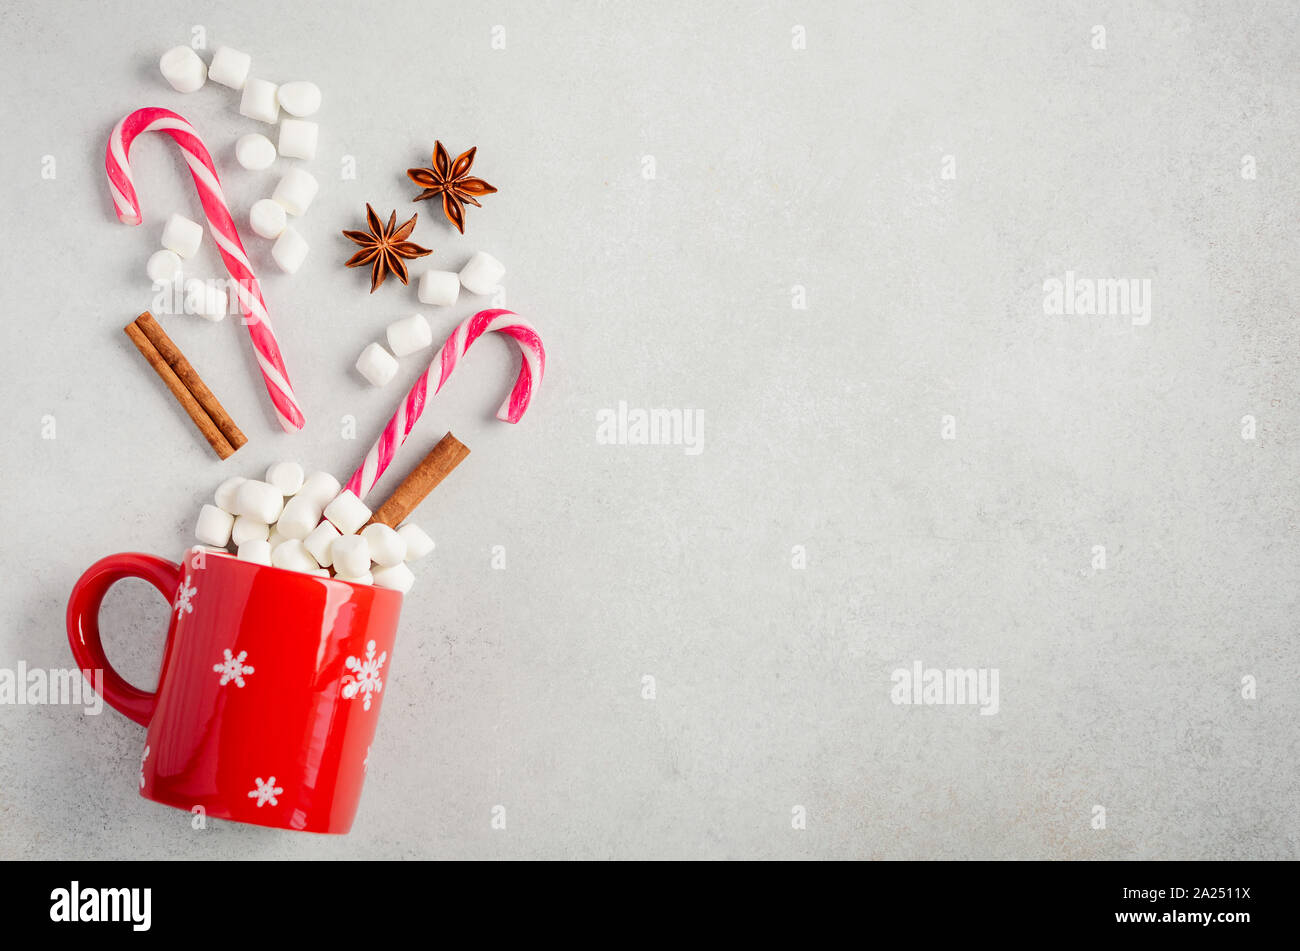 New Year or Christmas concept. Composition with marshmallows and candy canes on a gray concrete background. Top view, flat lay, copy space. Stock Photo